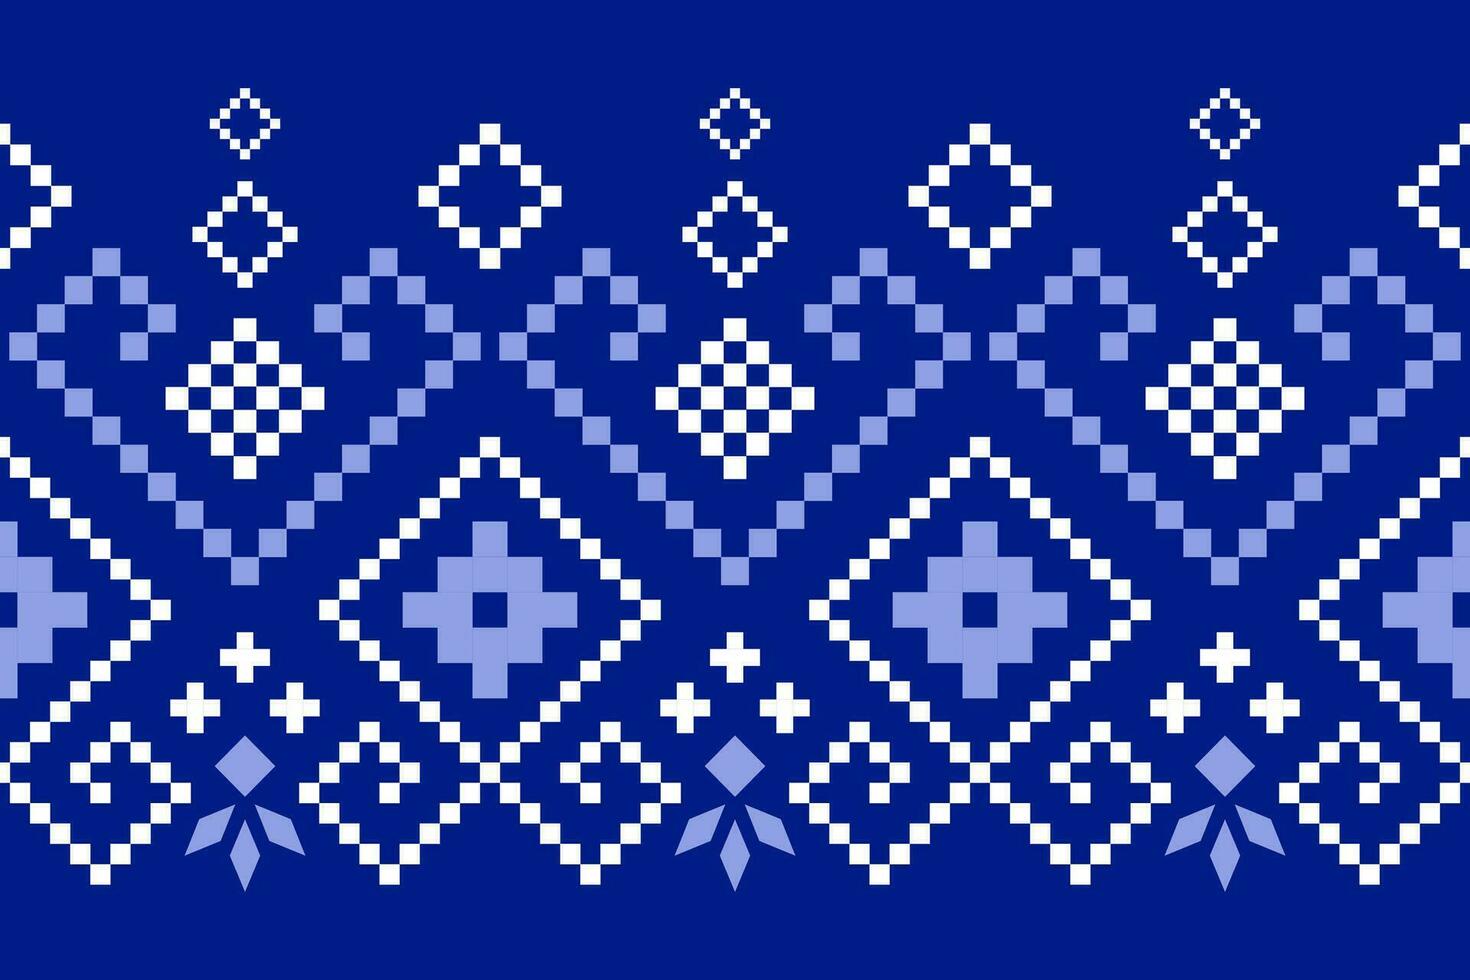 Indigo navy blue geometric traditional ethnic pattern Ikat seamless pattern border abstract design for fabric print cloth dress carpet curtains and sarong Aztec African Indian Indonesian vector